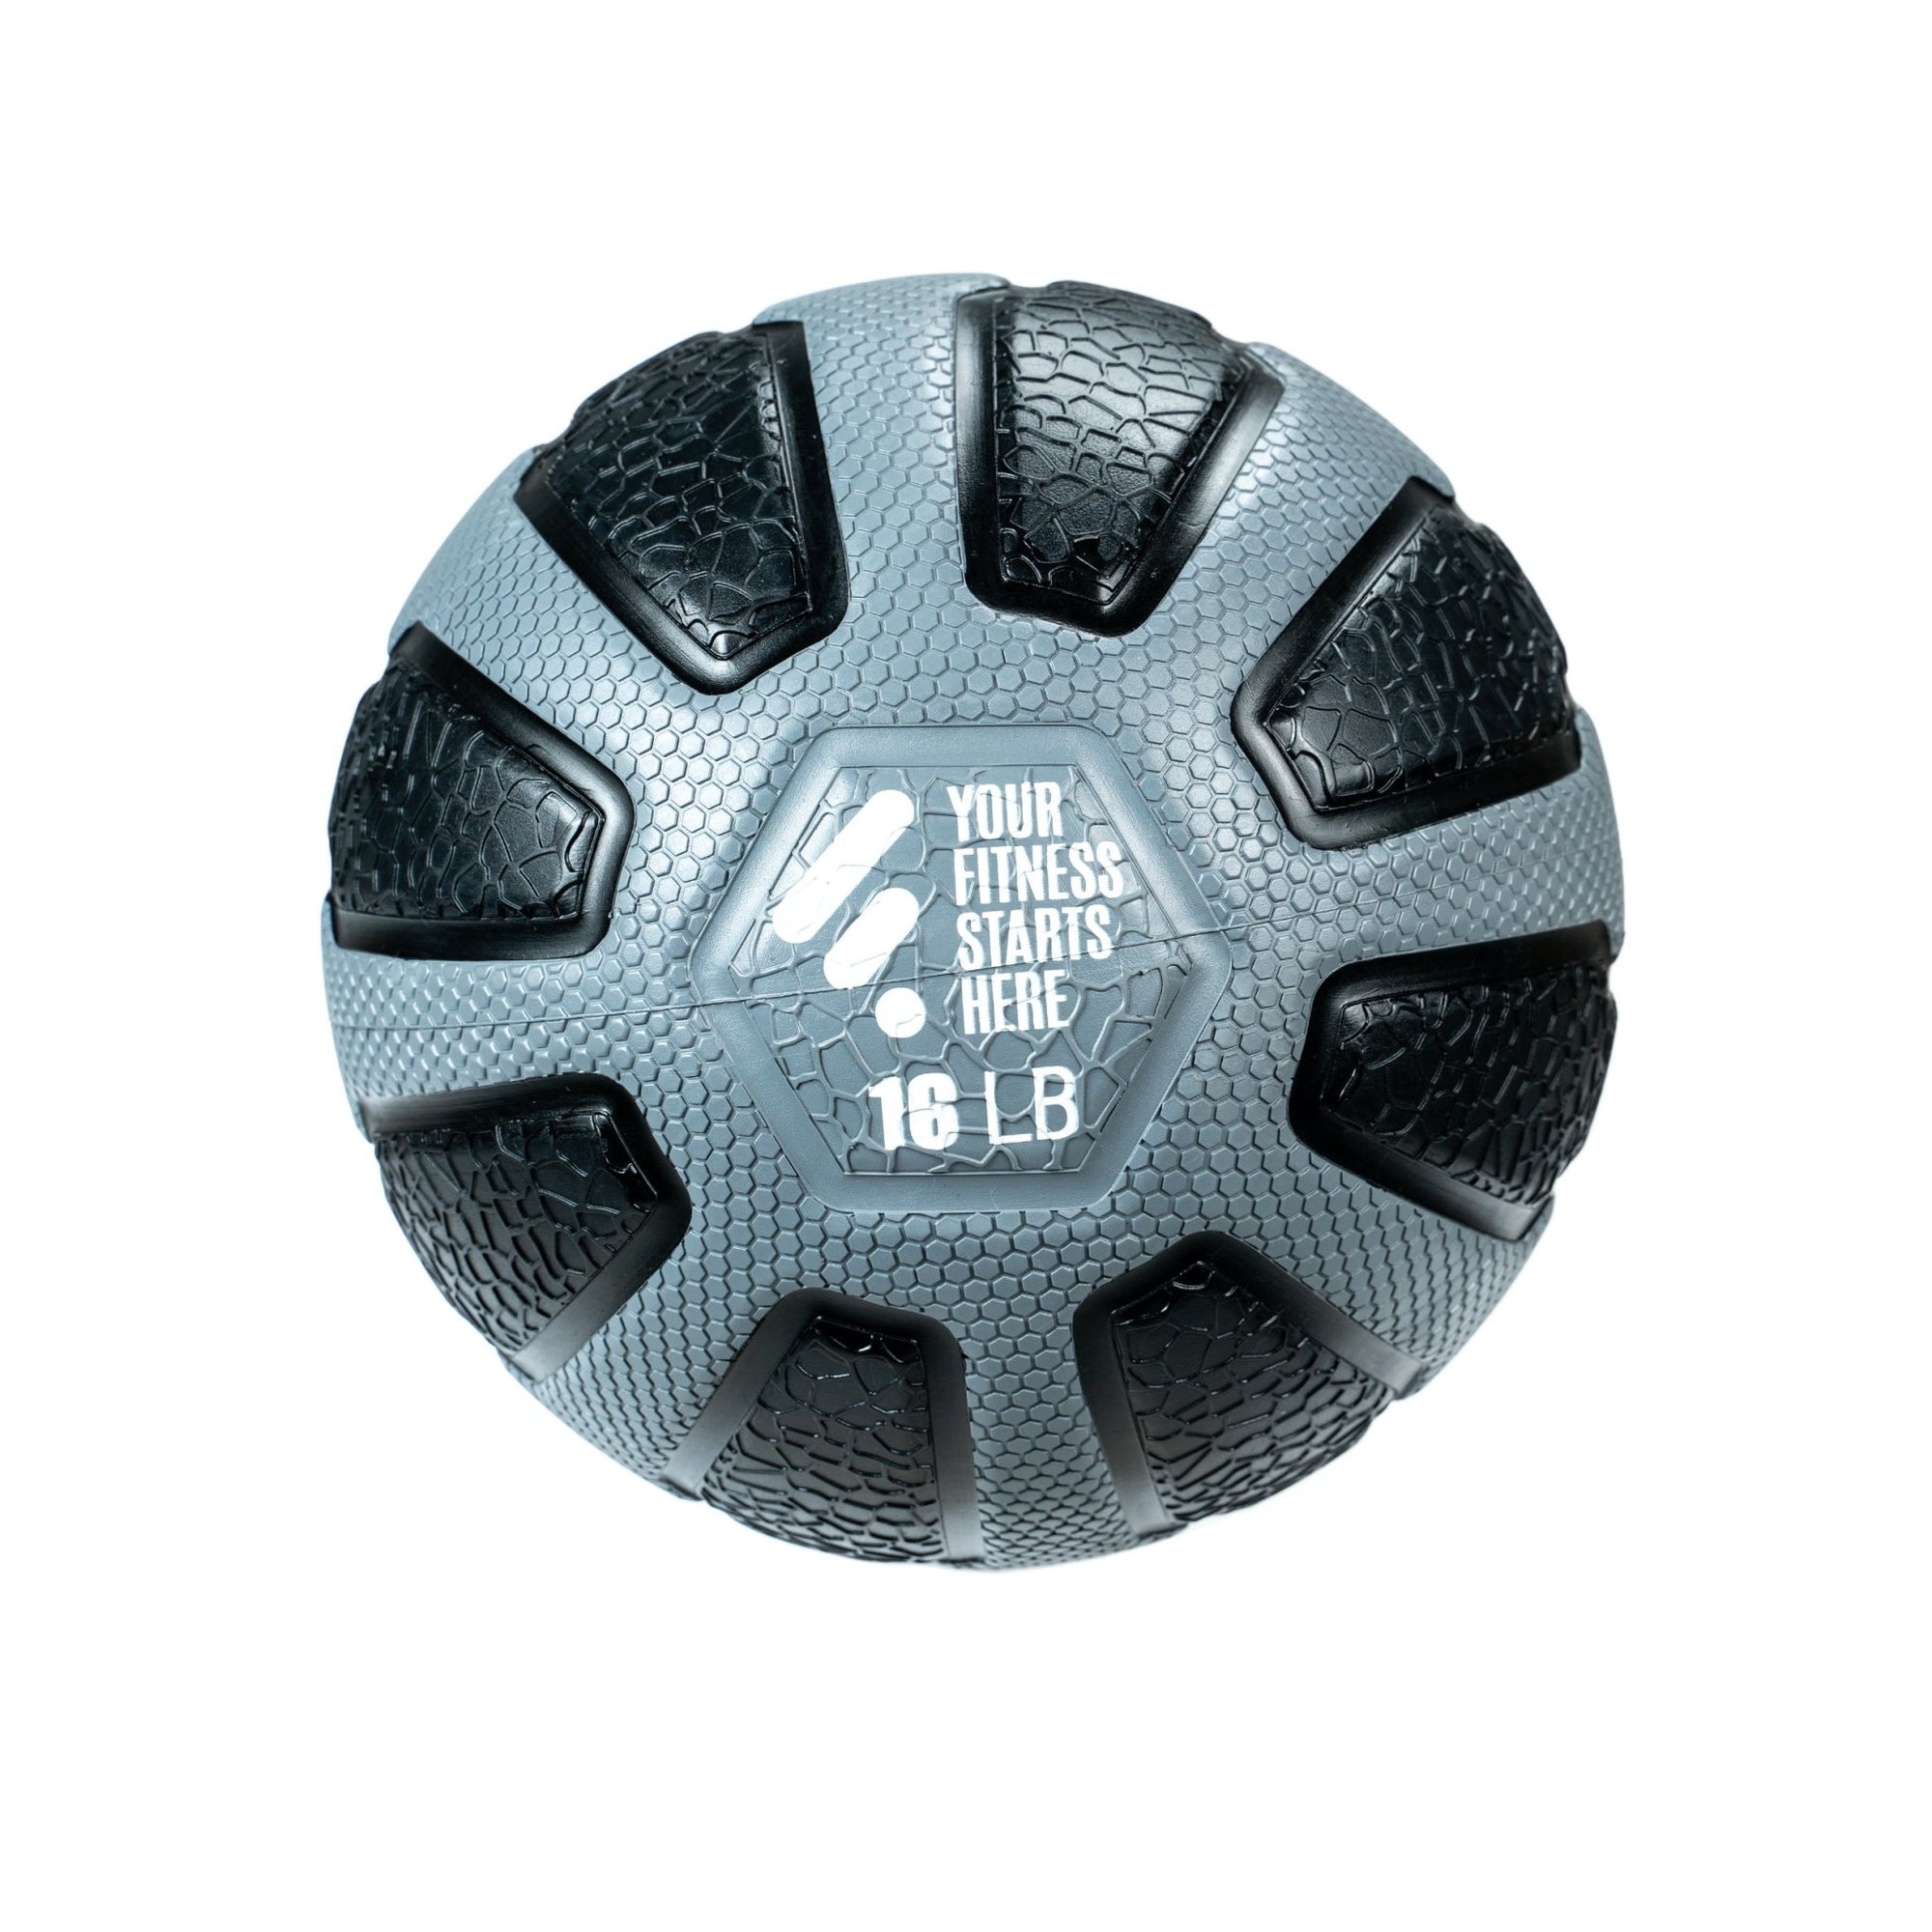 FitWay Equip. Max Grip Medicine Ball - 16 Lbs - Fitness Experience